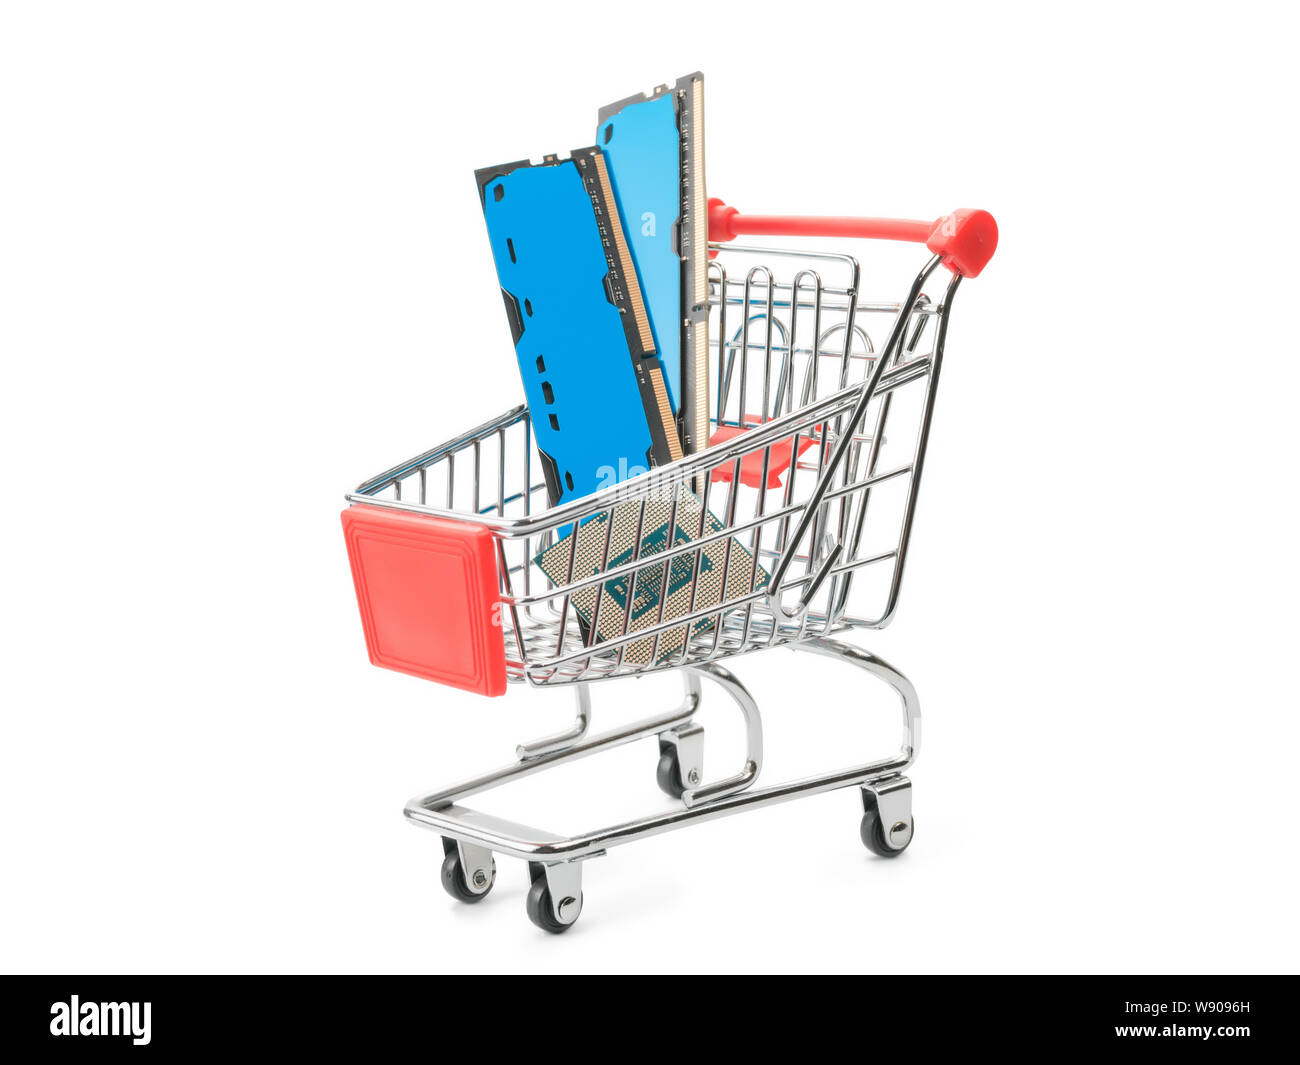 Toy shopping cart with computer parts. Isolated on white Stock Photo